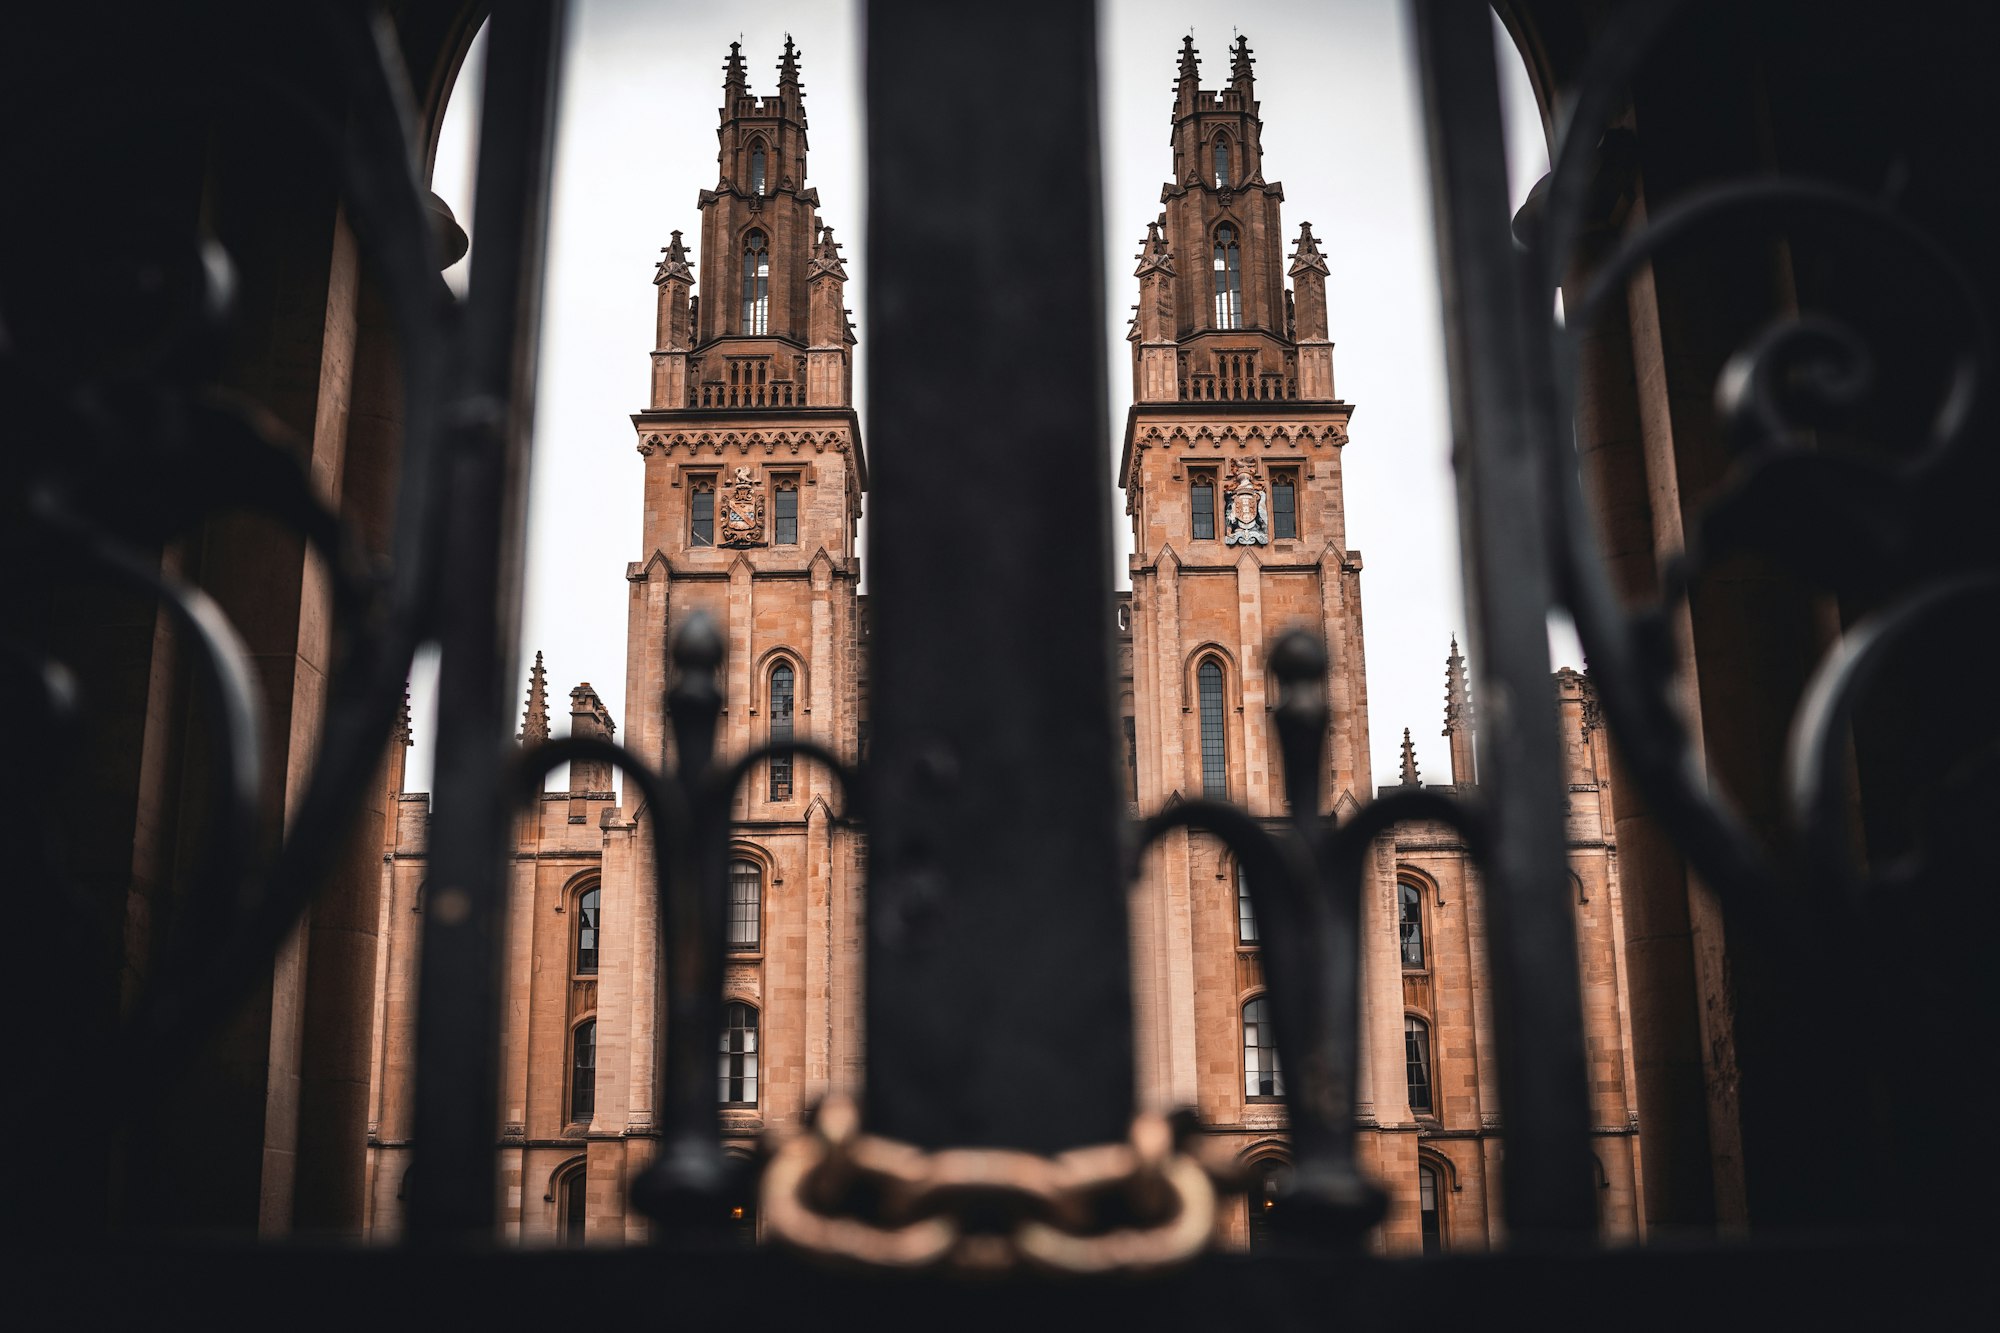 imposing oxford university towers viewed through a fence